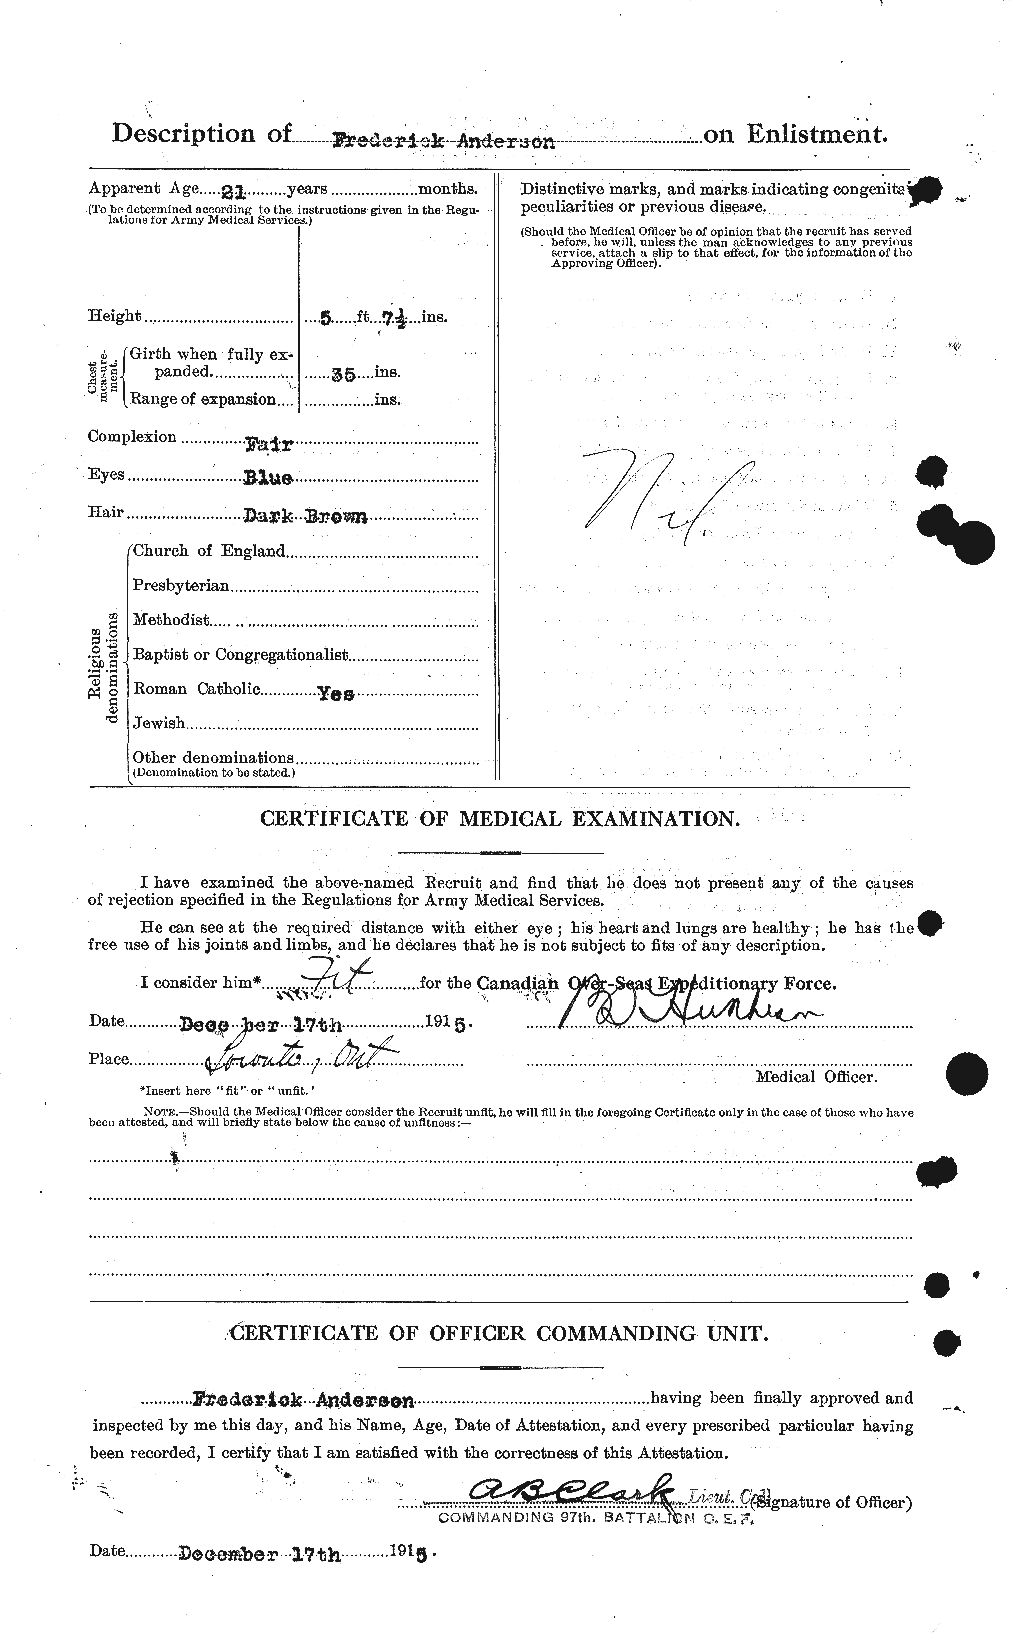 Personnel Records of the First World War - CEF 209821b